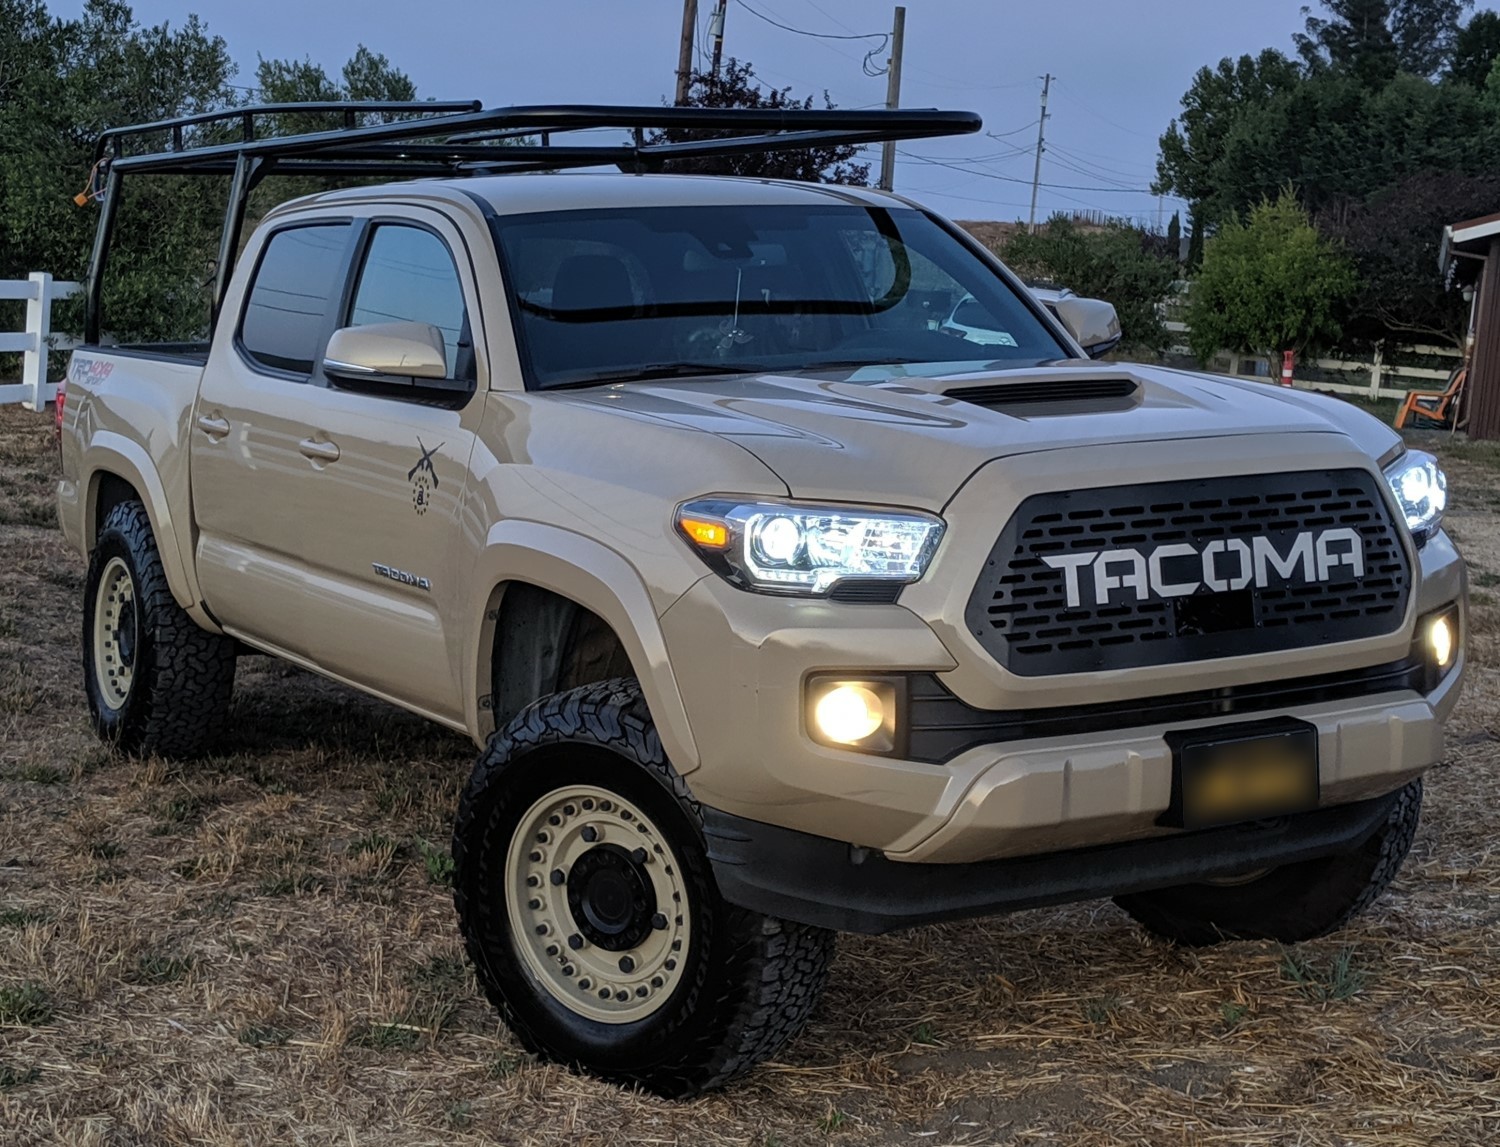 TSS Compatible Custom Grille for 2018+ Tacoma: Laser Cut Stainless Steel in Black